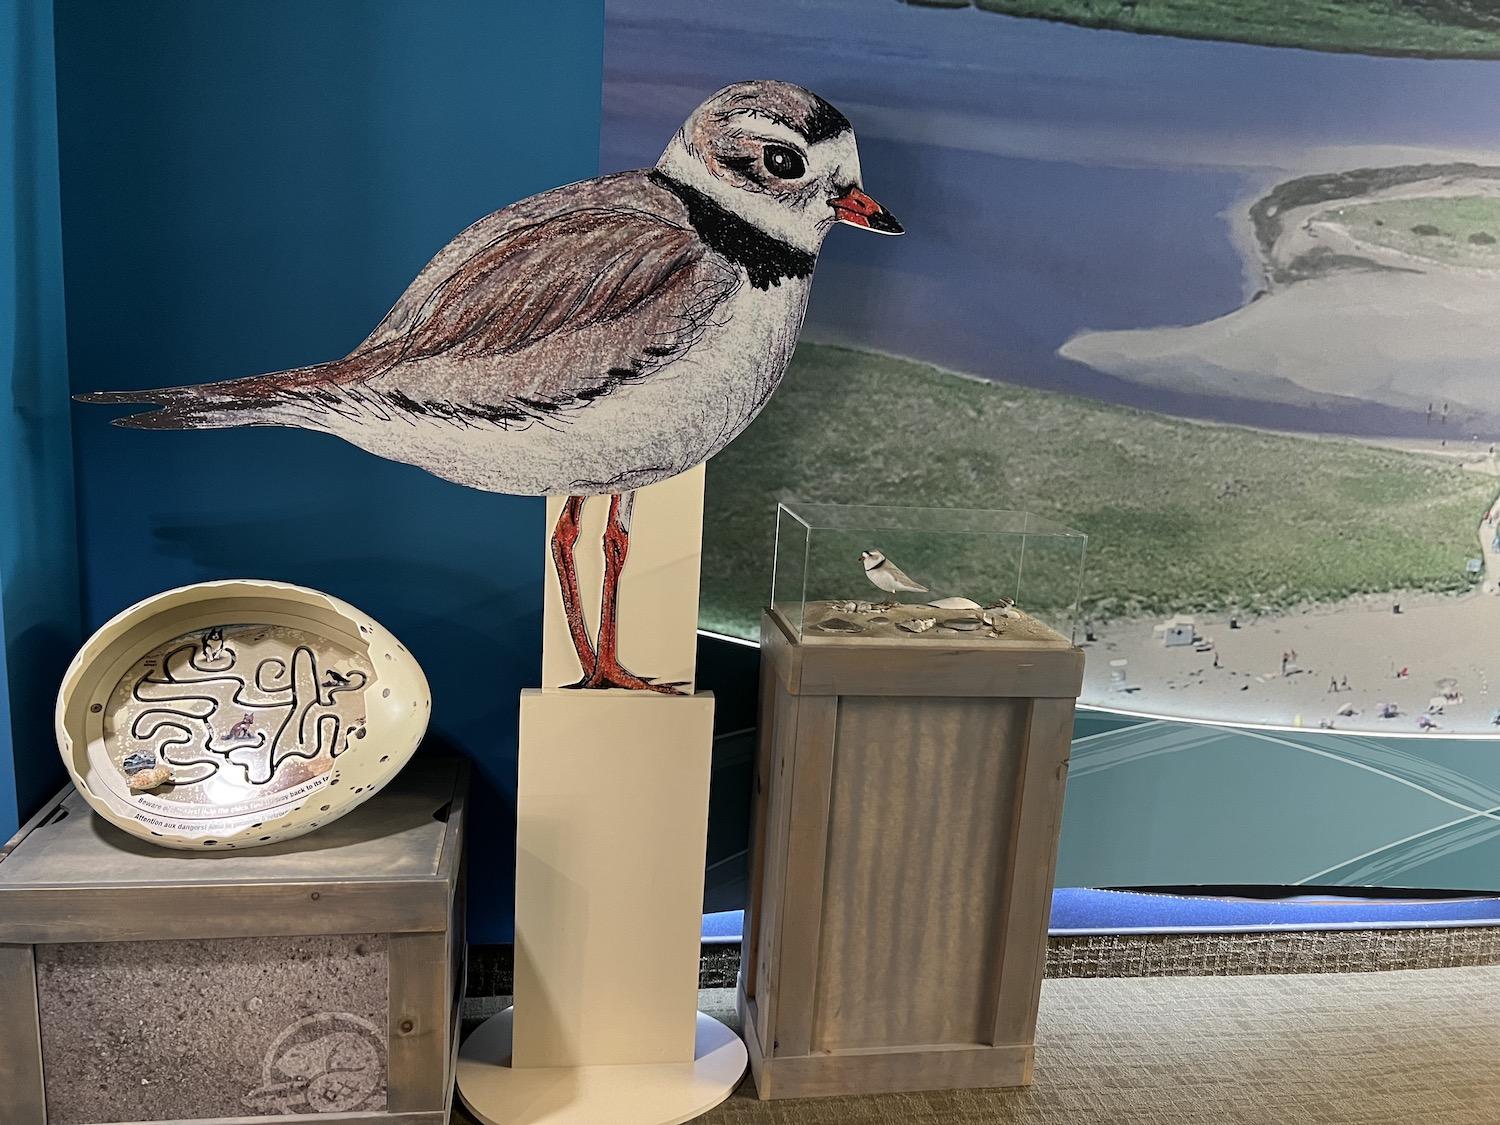 Inside the Kouchibouguac National Park visitor reception center, Piping Plover messaging is aimed at kids.